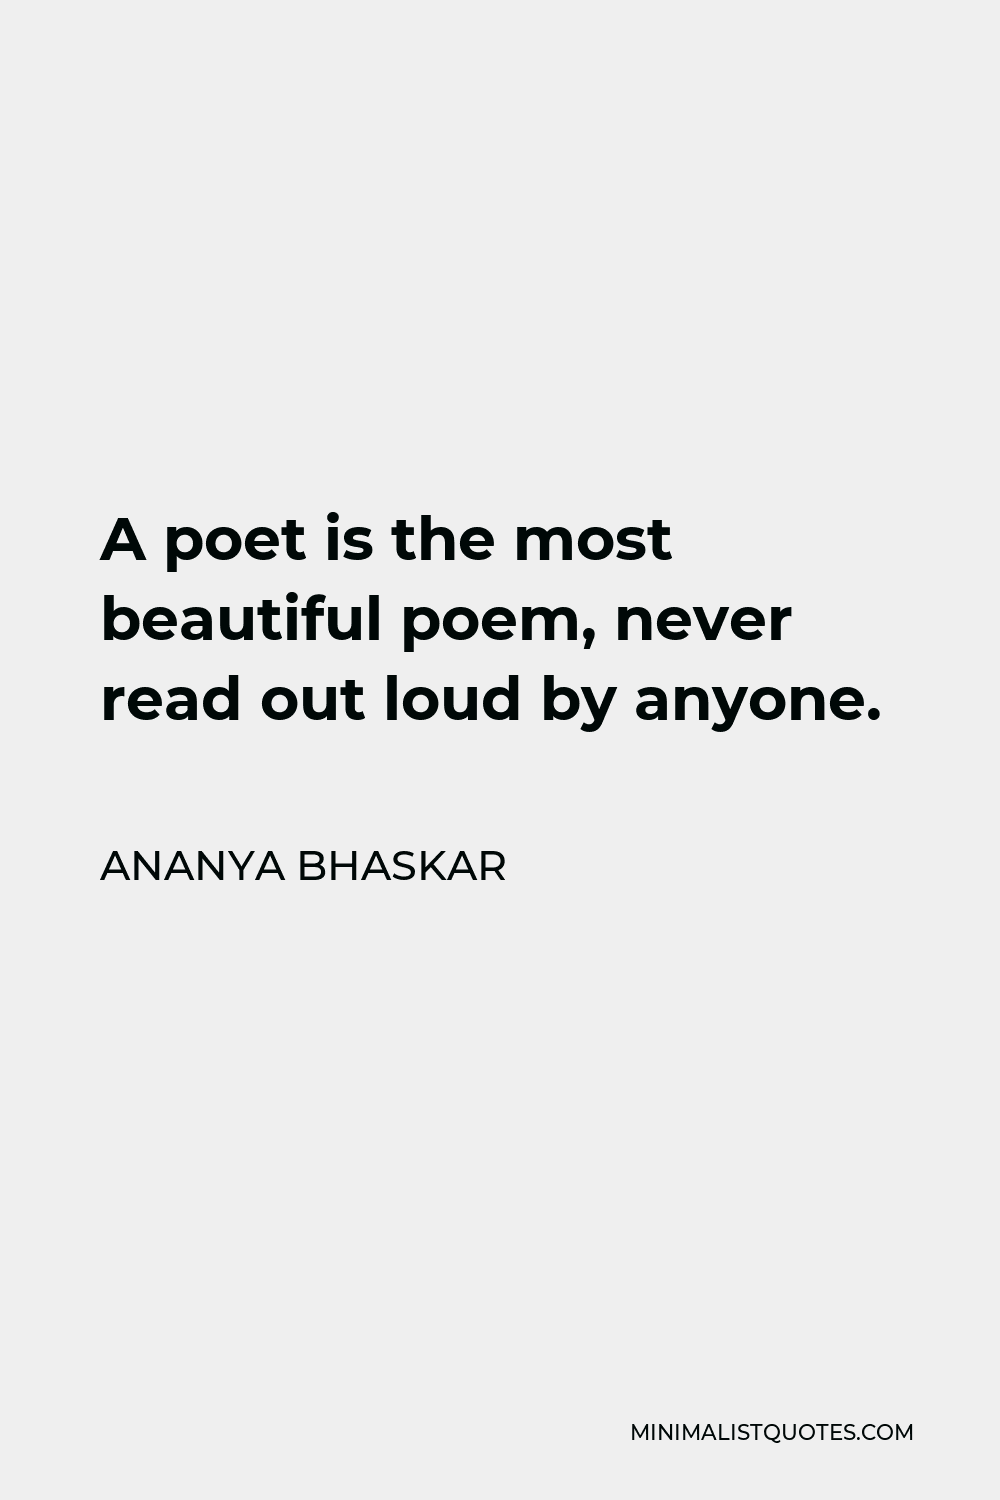 ananya-bhaskar-quote-a-poet-is-the-most-beautiful-poem-never-read-out